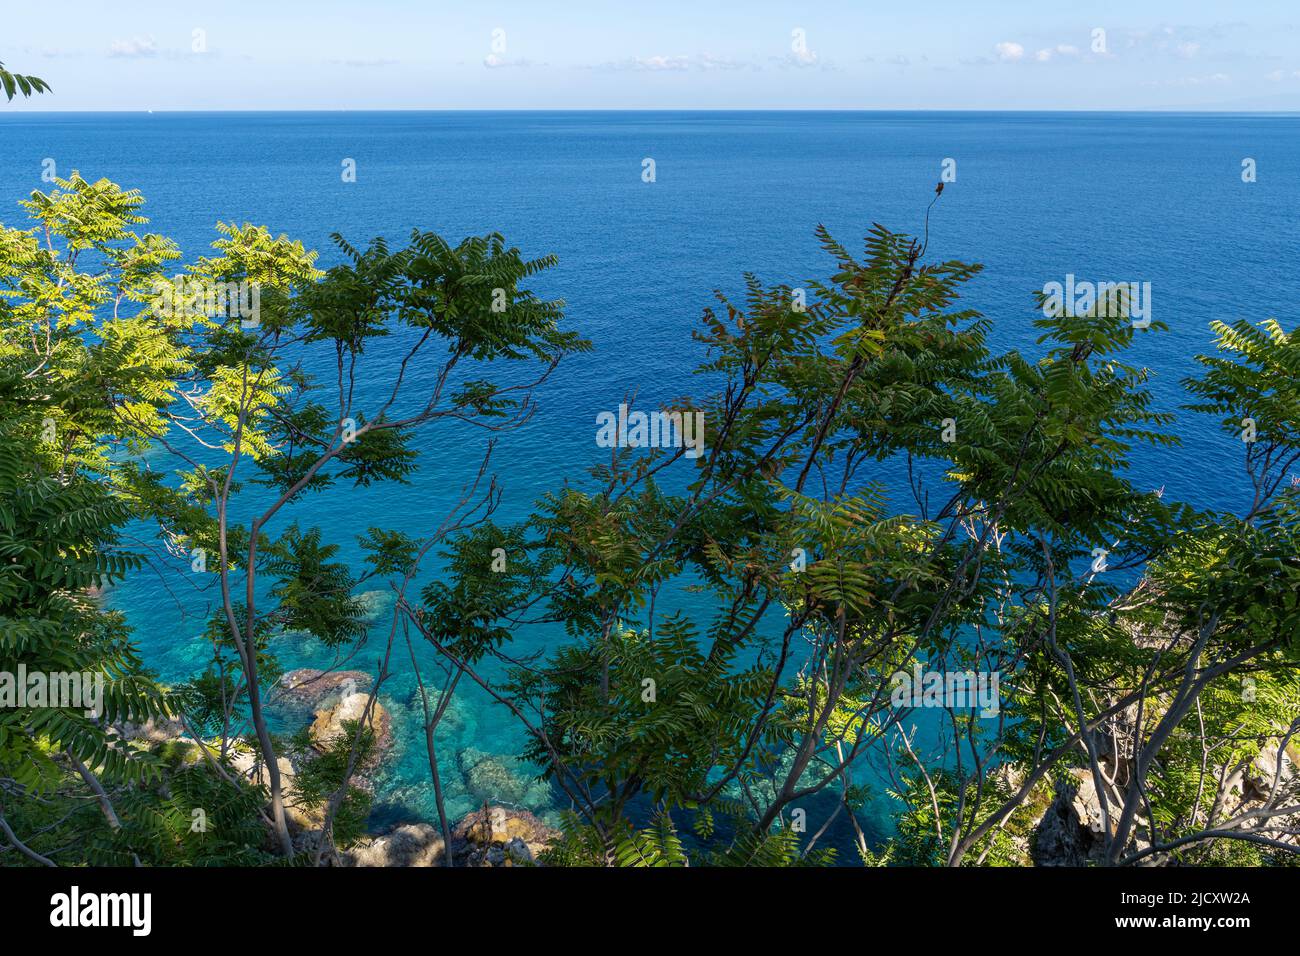 The crystal clear waters of the Calabrian coast in southern Italy Stock Photo